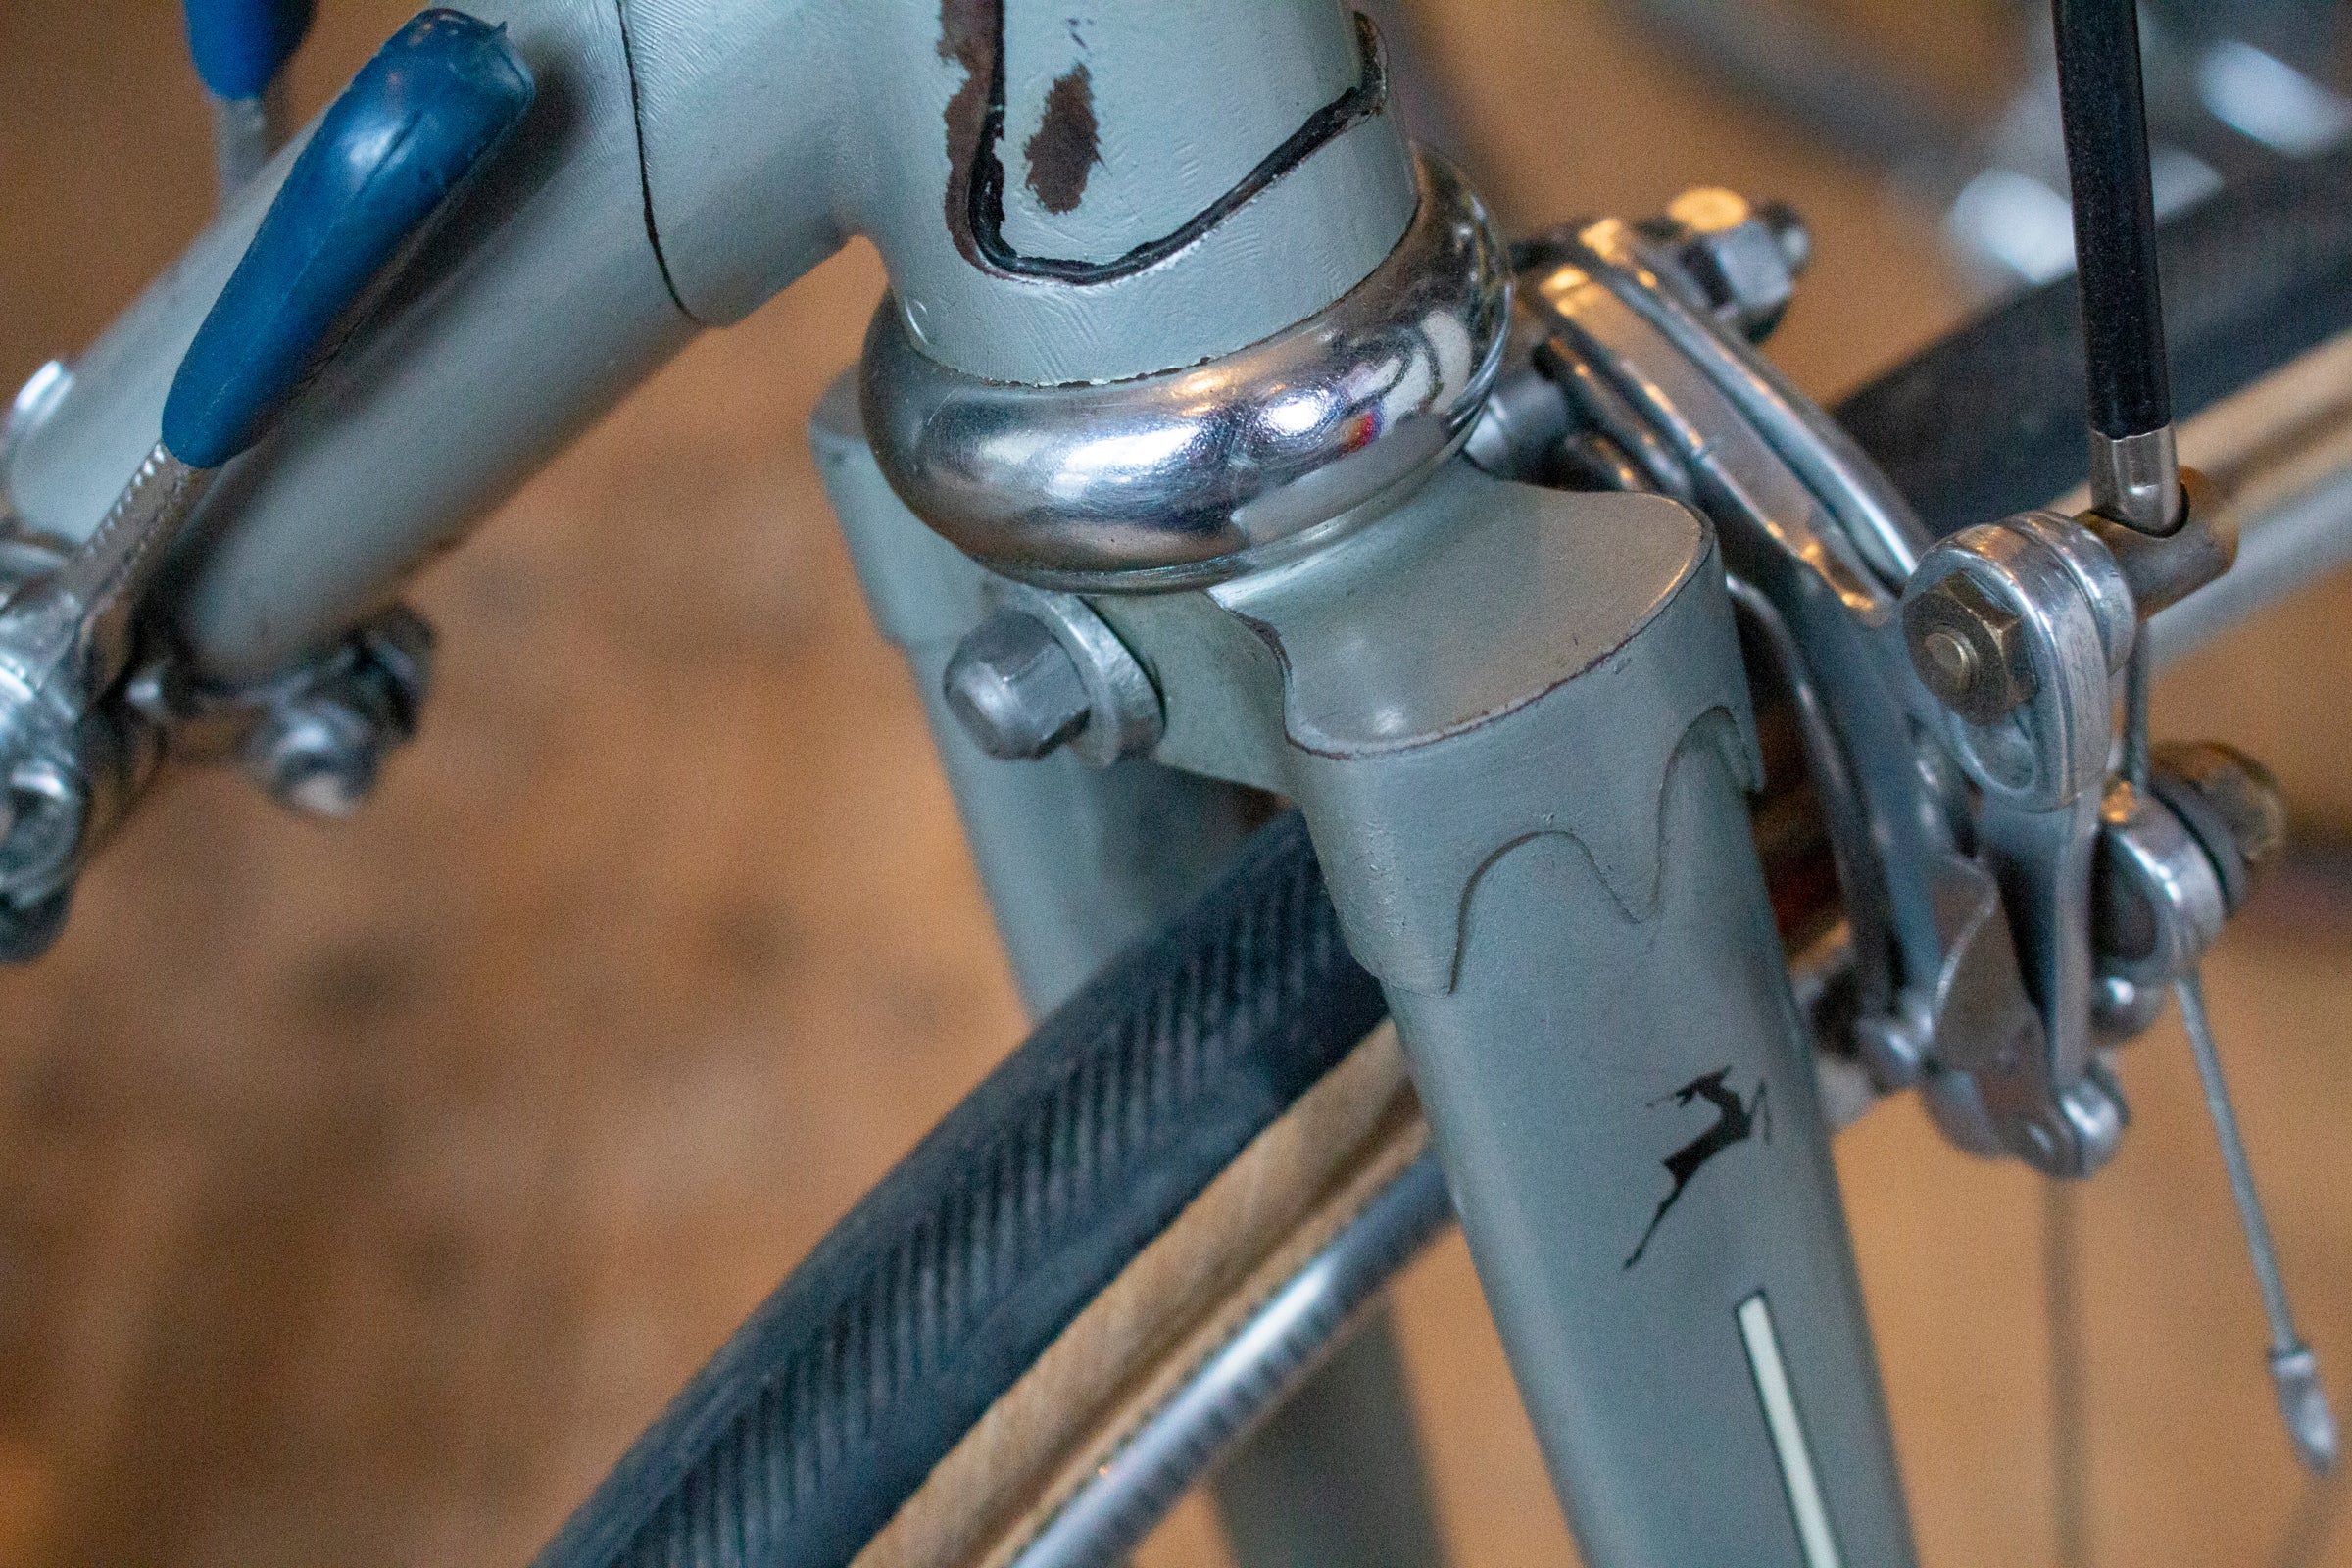 How to get the right brakes - External hex nut fitment - Pedal Pedlar Classic & Vintage Cycling